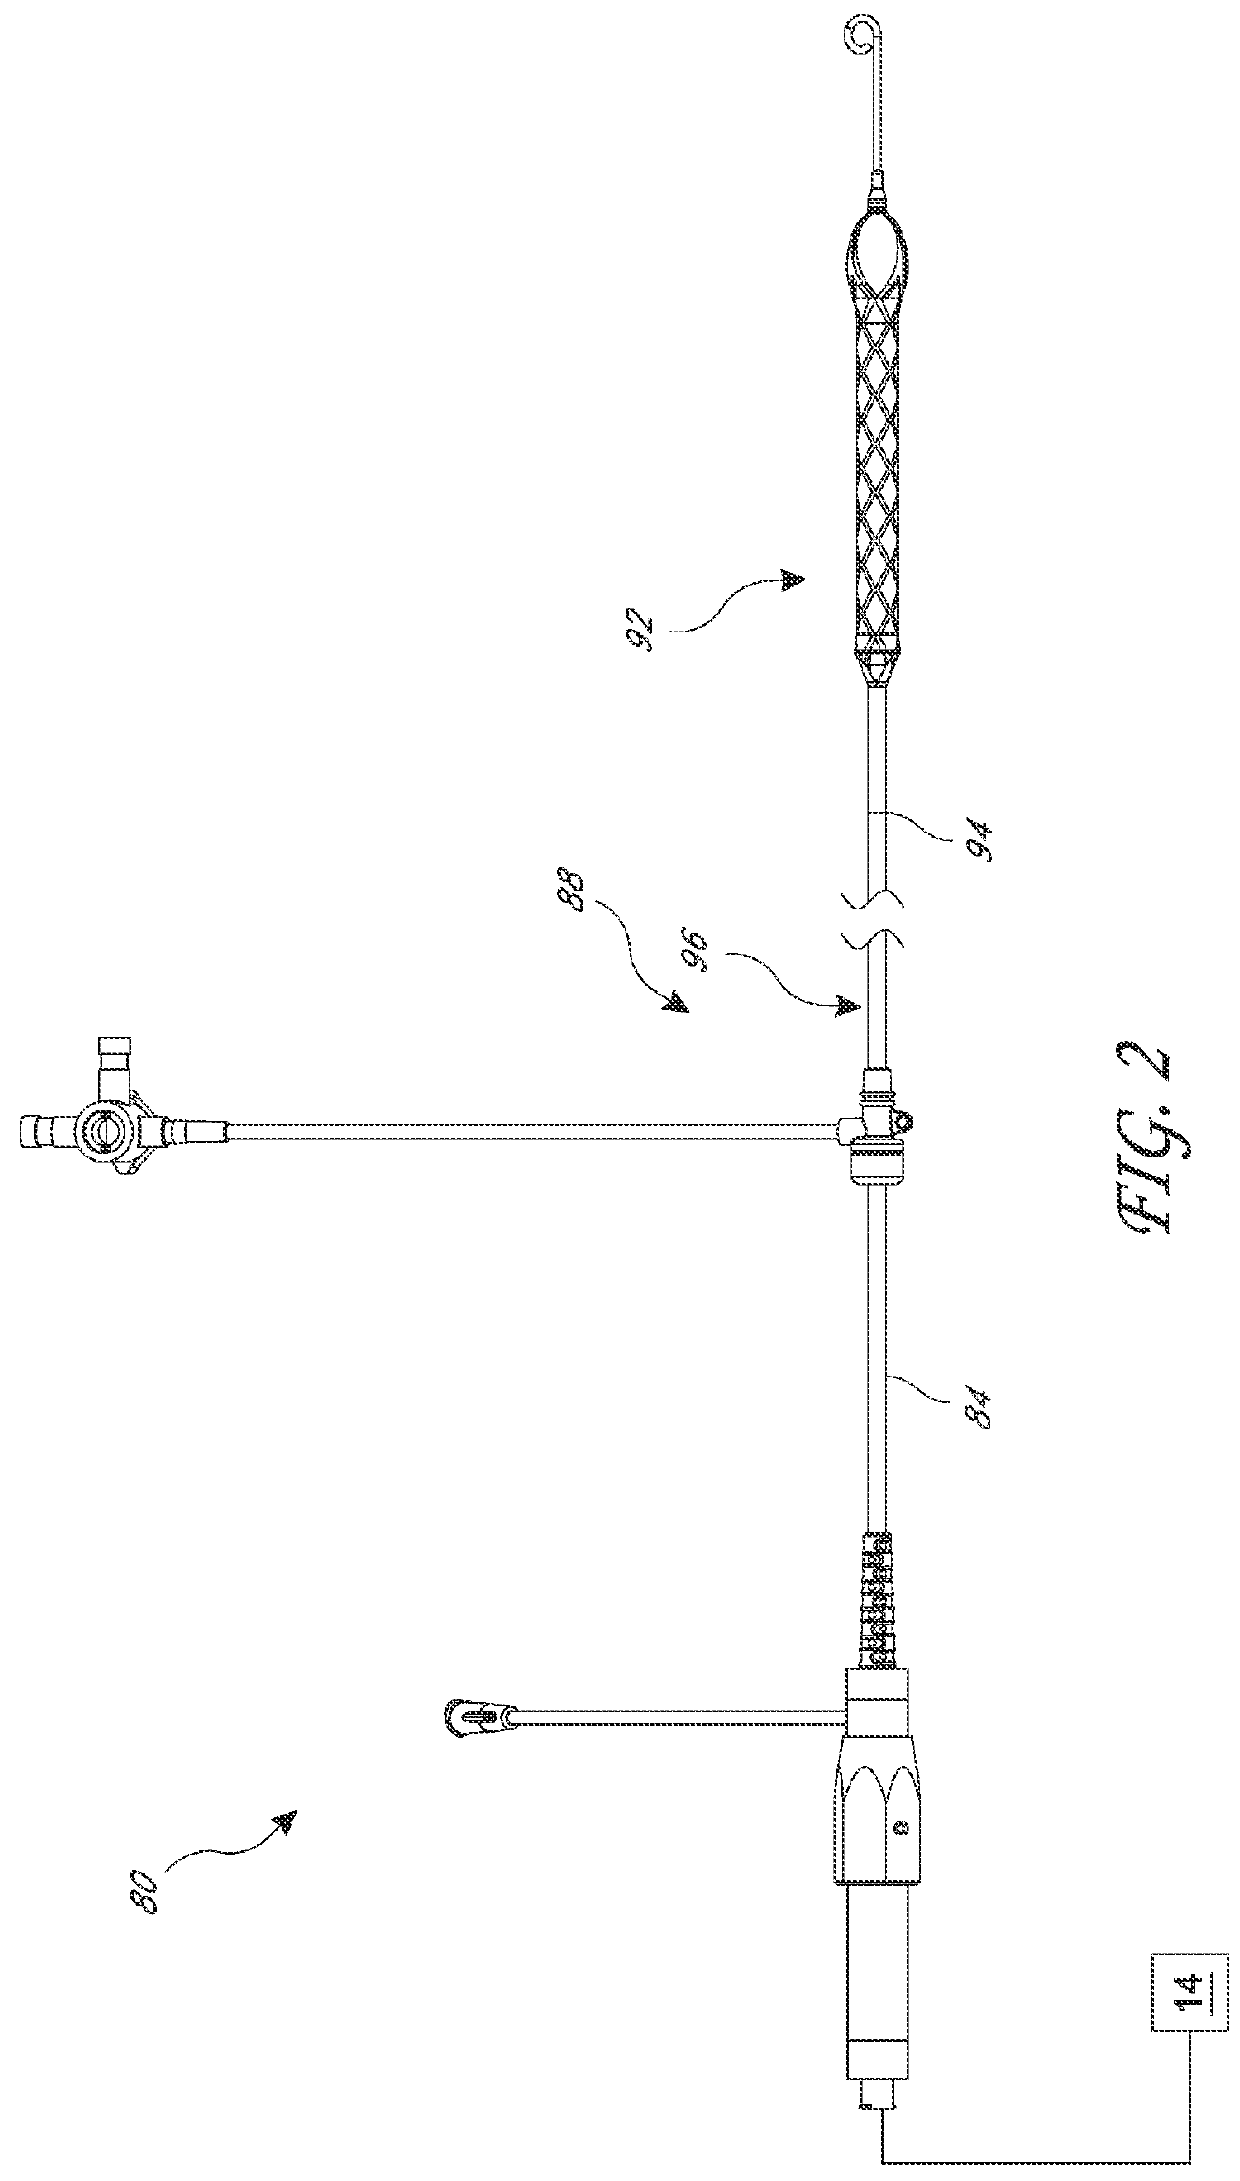 Catheter pump assembly including a stator